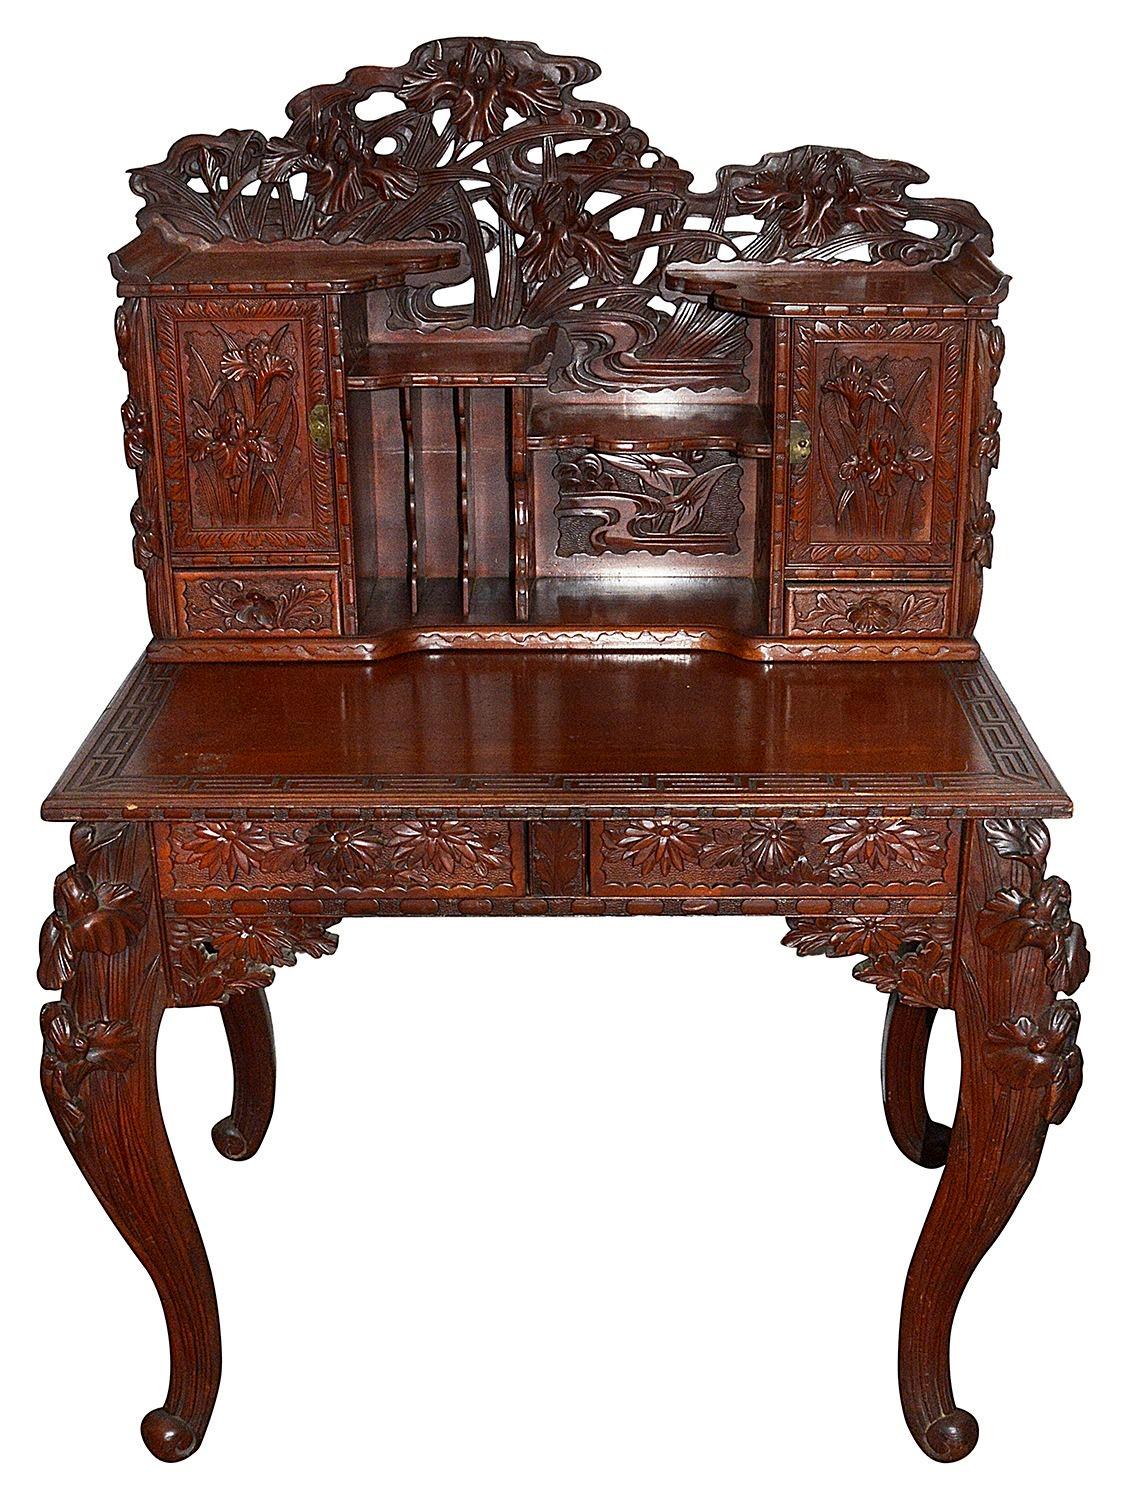 A good quality Japanese carved wood desk, having wonderful carved exotic flowers and foliage to the cupboards, drawers and elegant cabriole legs.
Batch 75

Batch 75